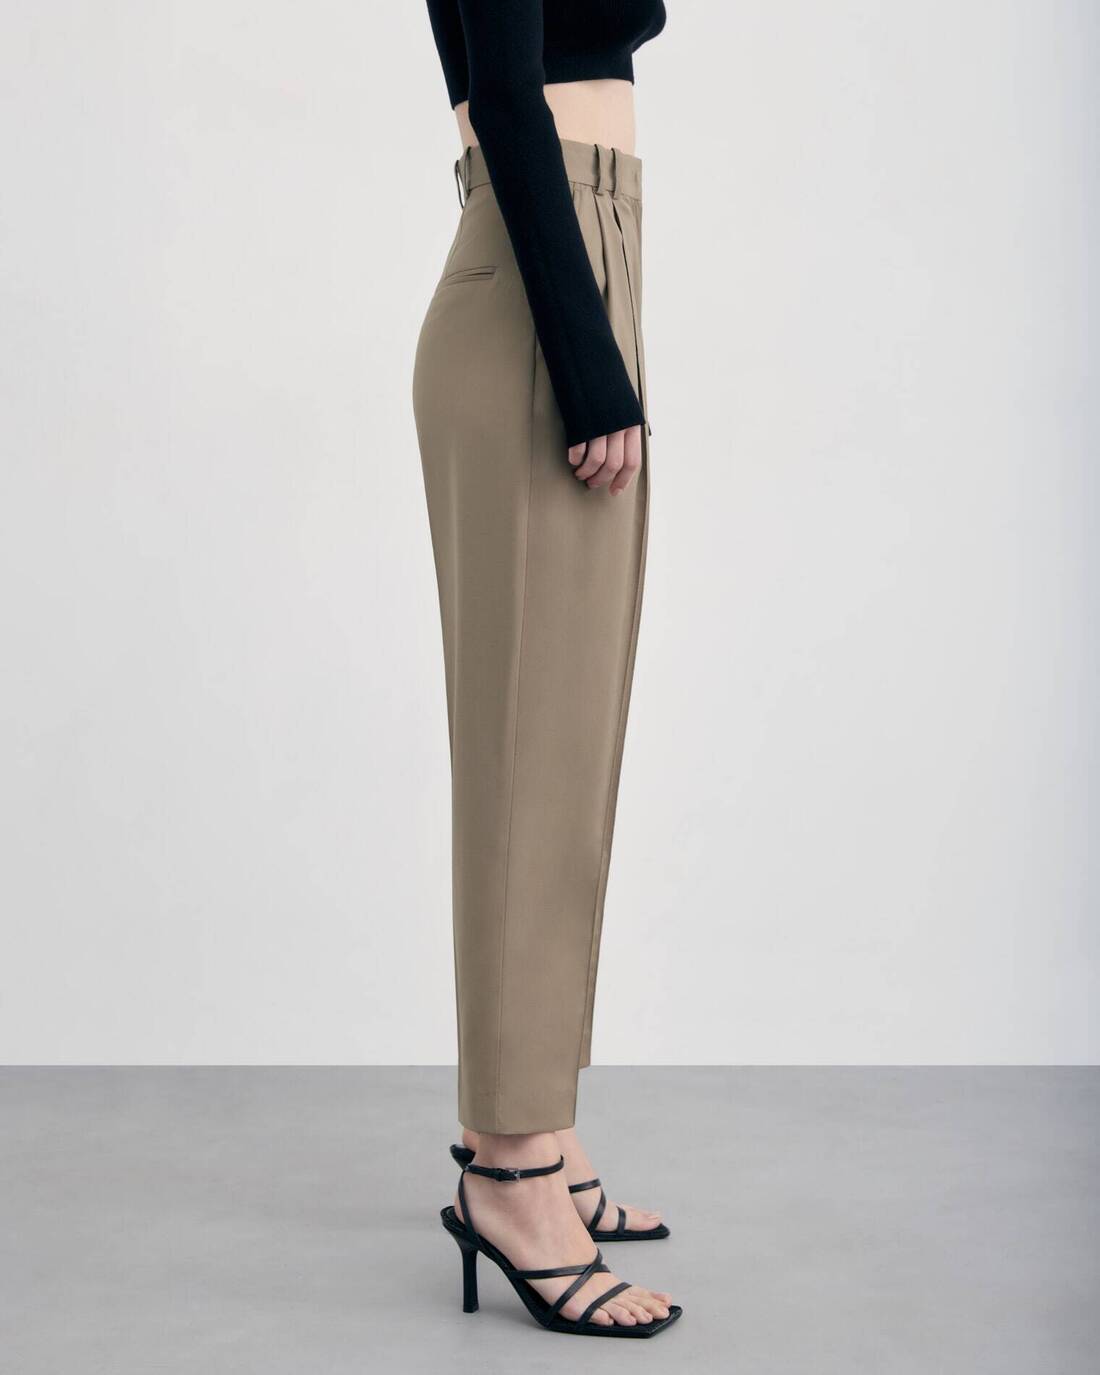 High-wasted suit pants